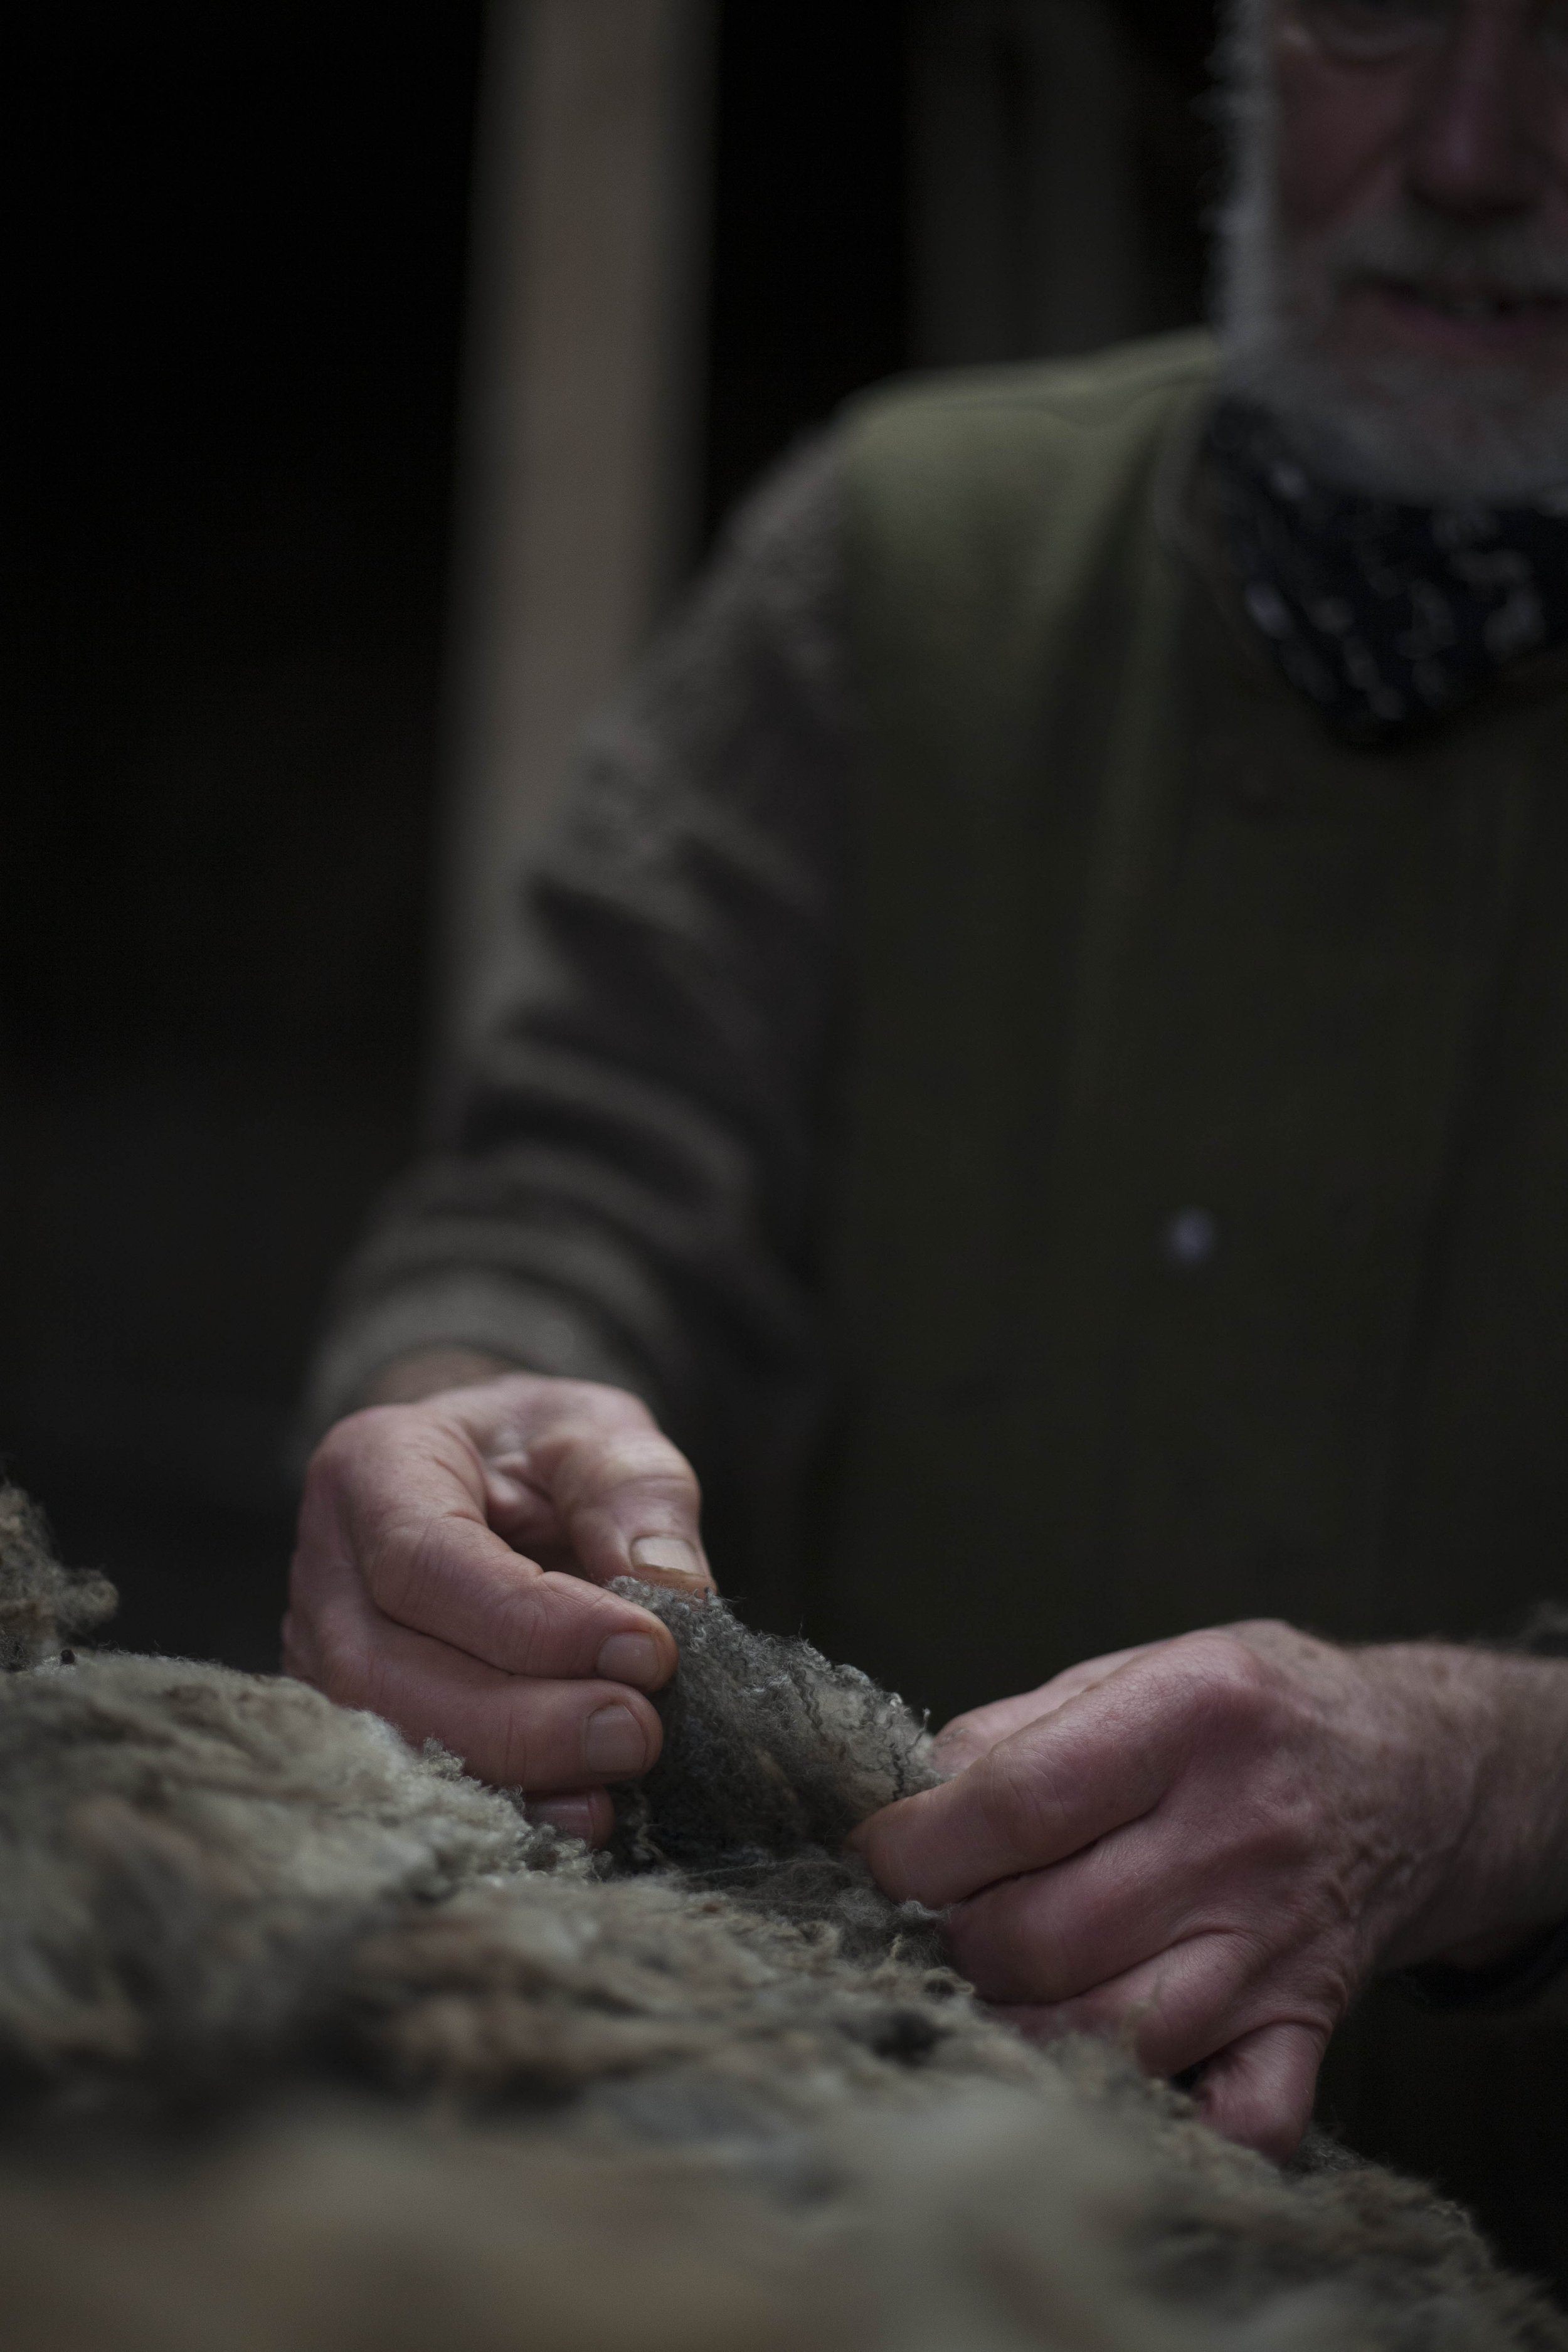 Photograph by Hatty Frances Bell of hands in fleece at Middle Campscott Farm for Fibreshed